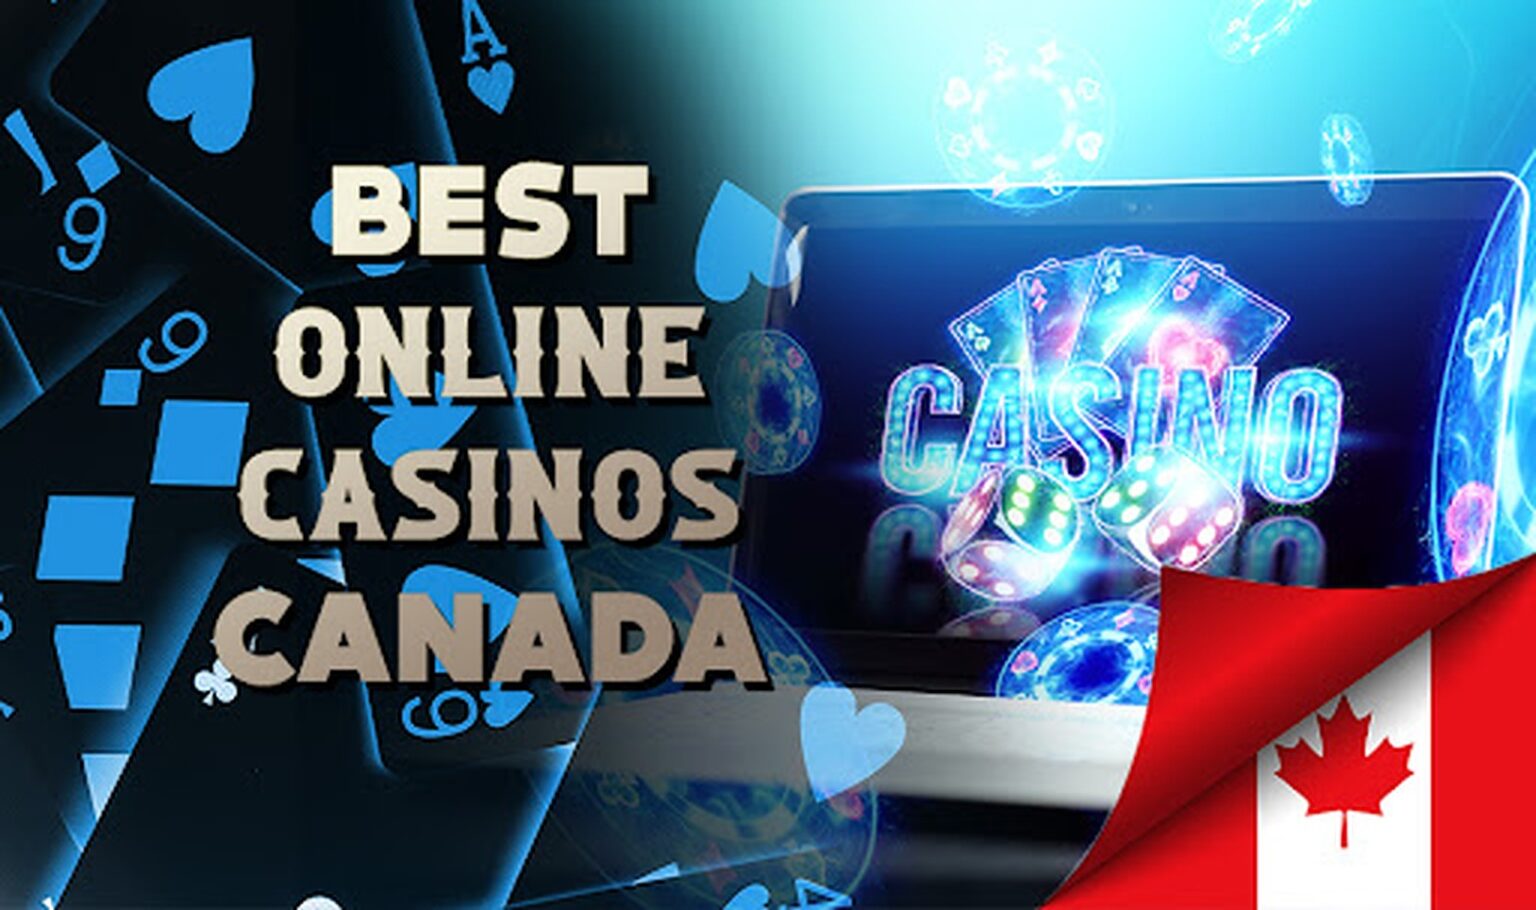 On the hunt for the best online casinos in Canada? Check out our list of top Canadian real money casinos and start gambling now.